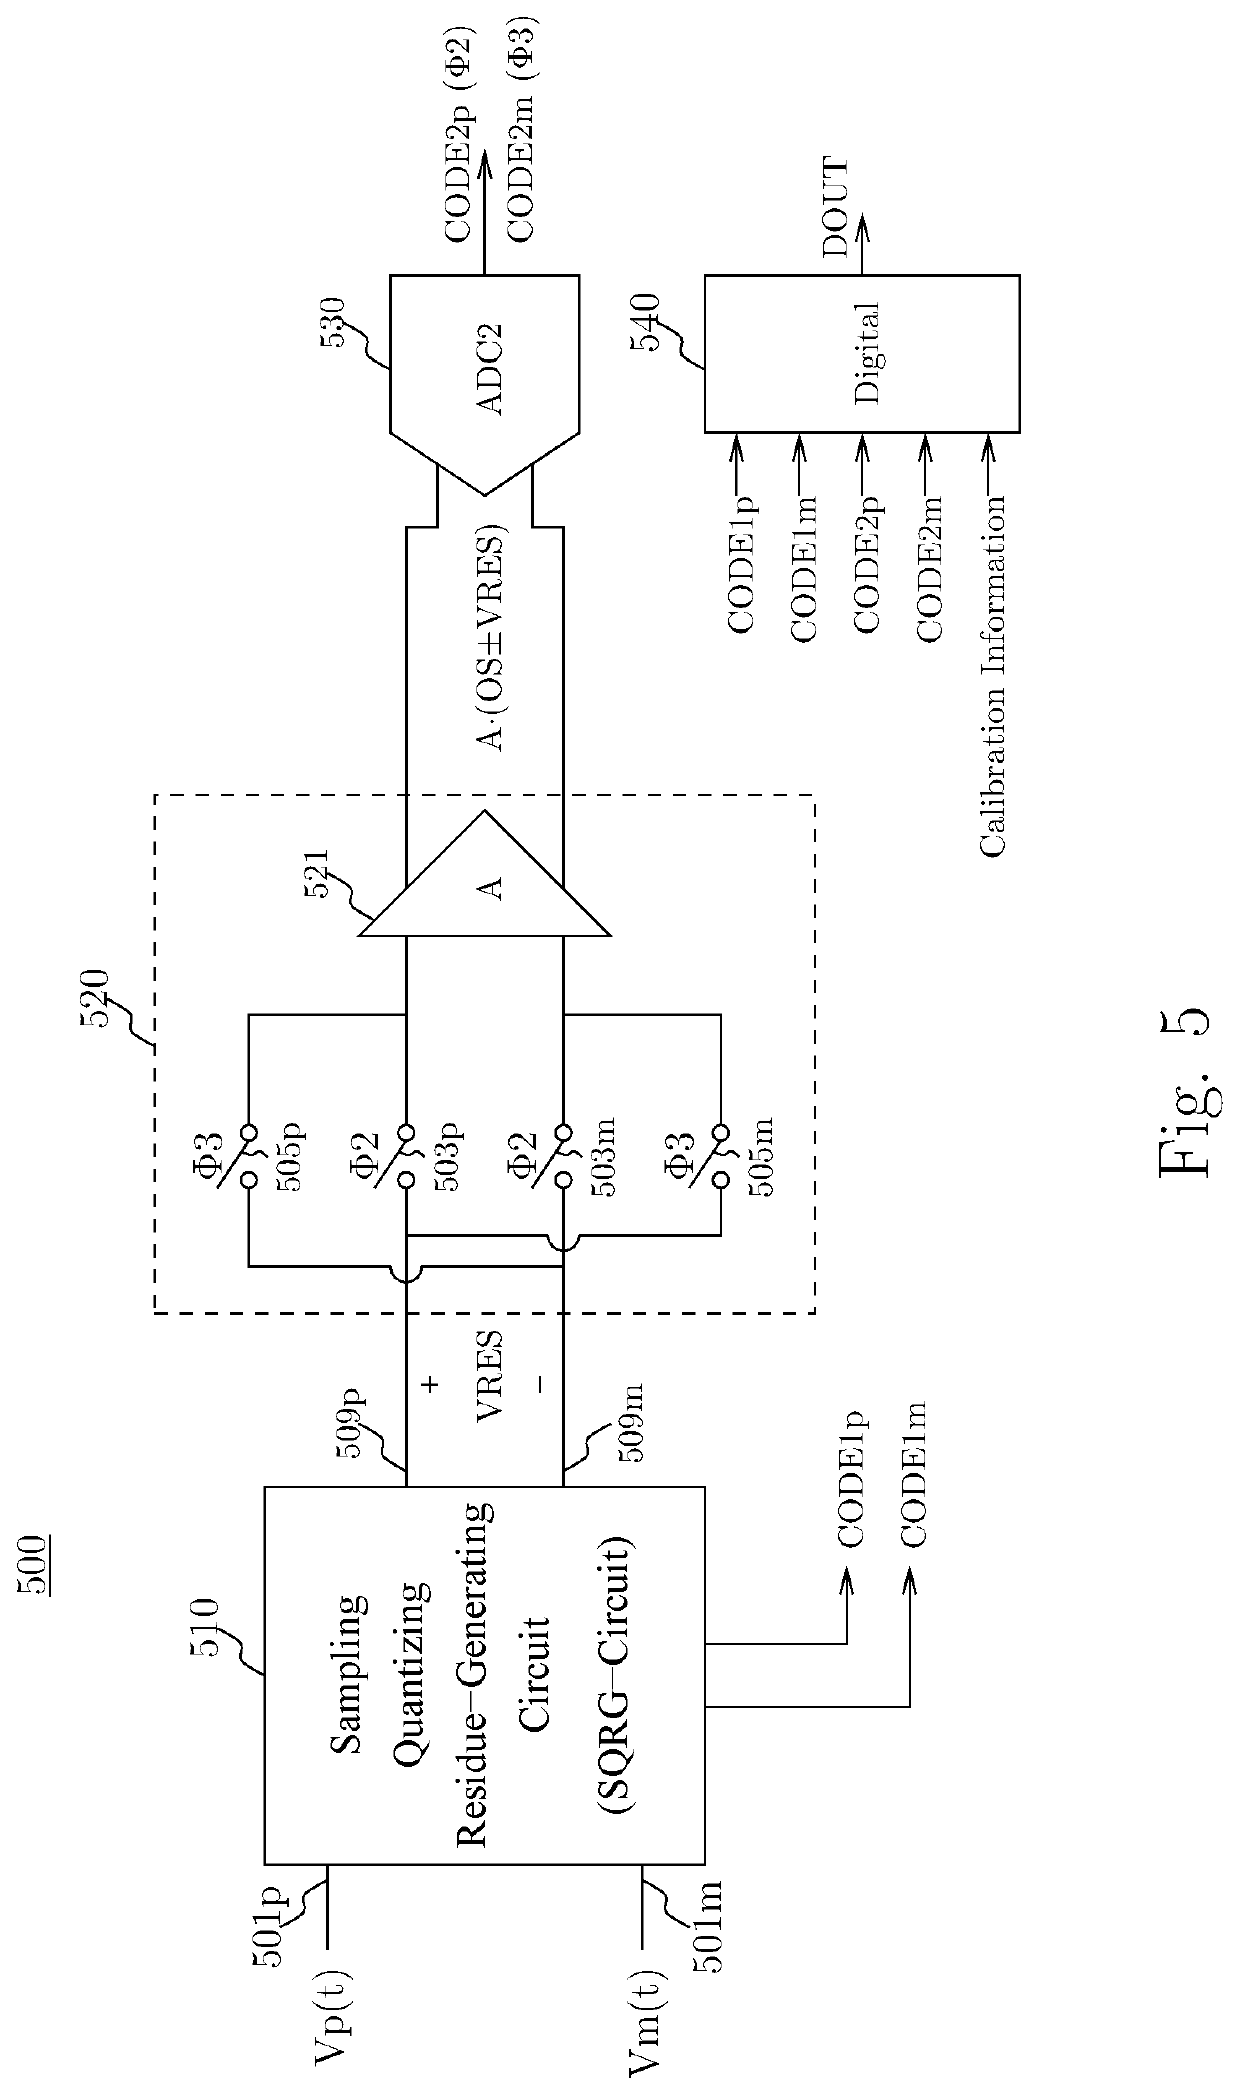 Analog-to-digital converter with auto-zeroing residue amplification circuit